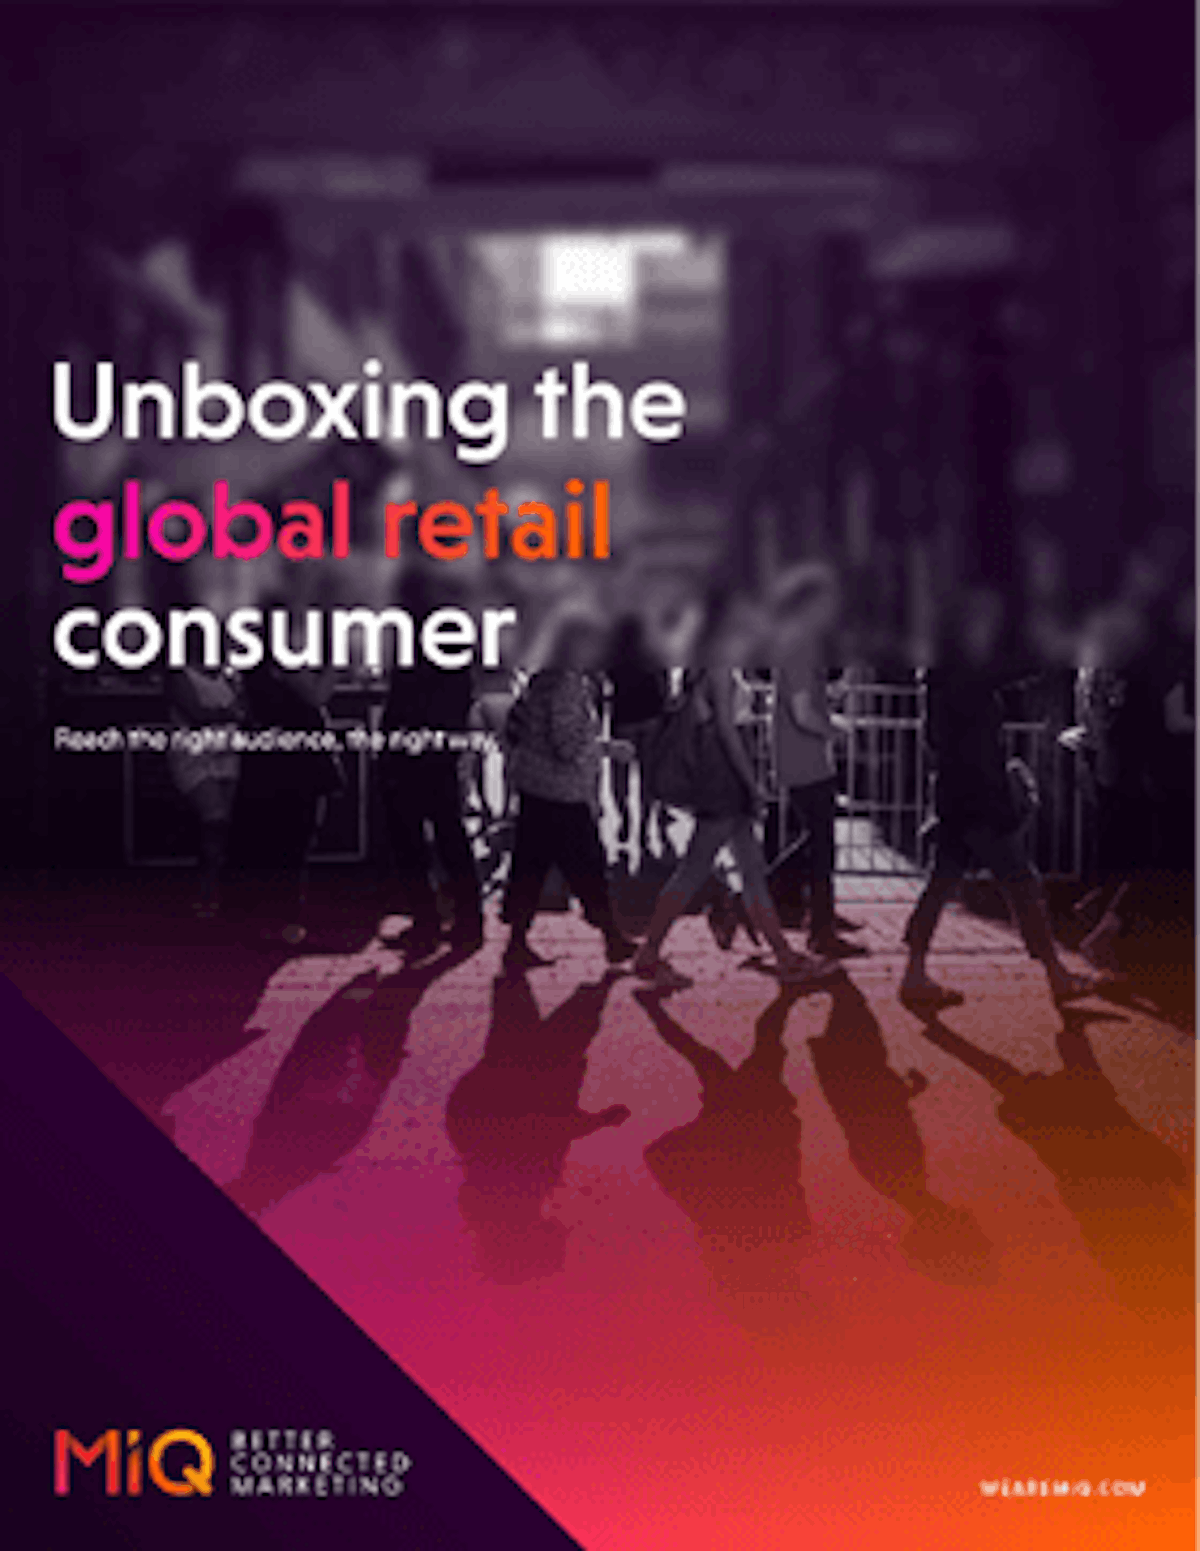 Unboxing the global retail consumer